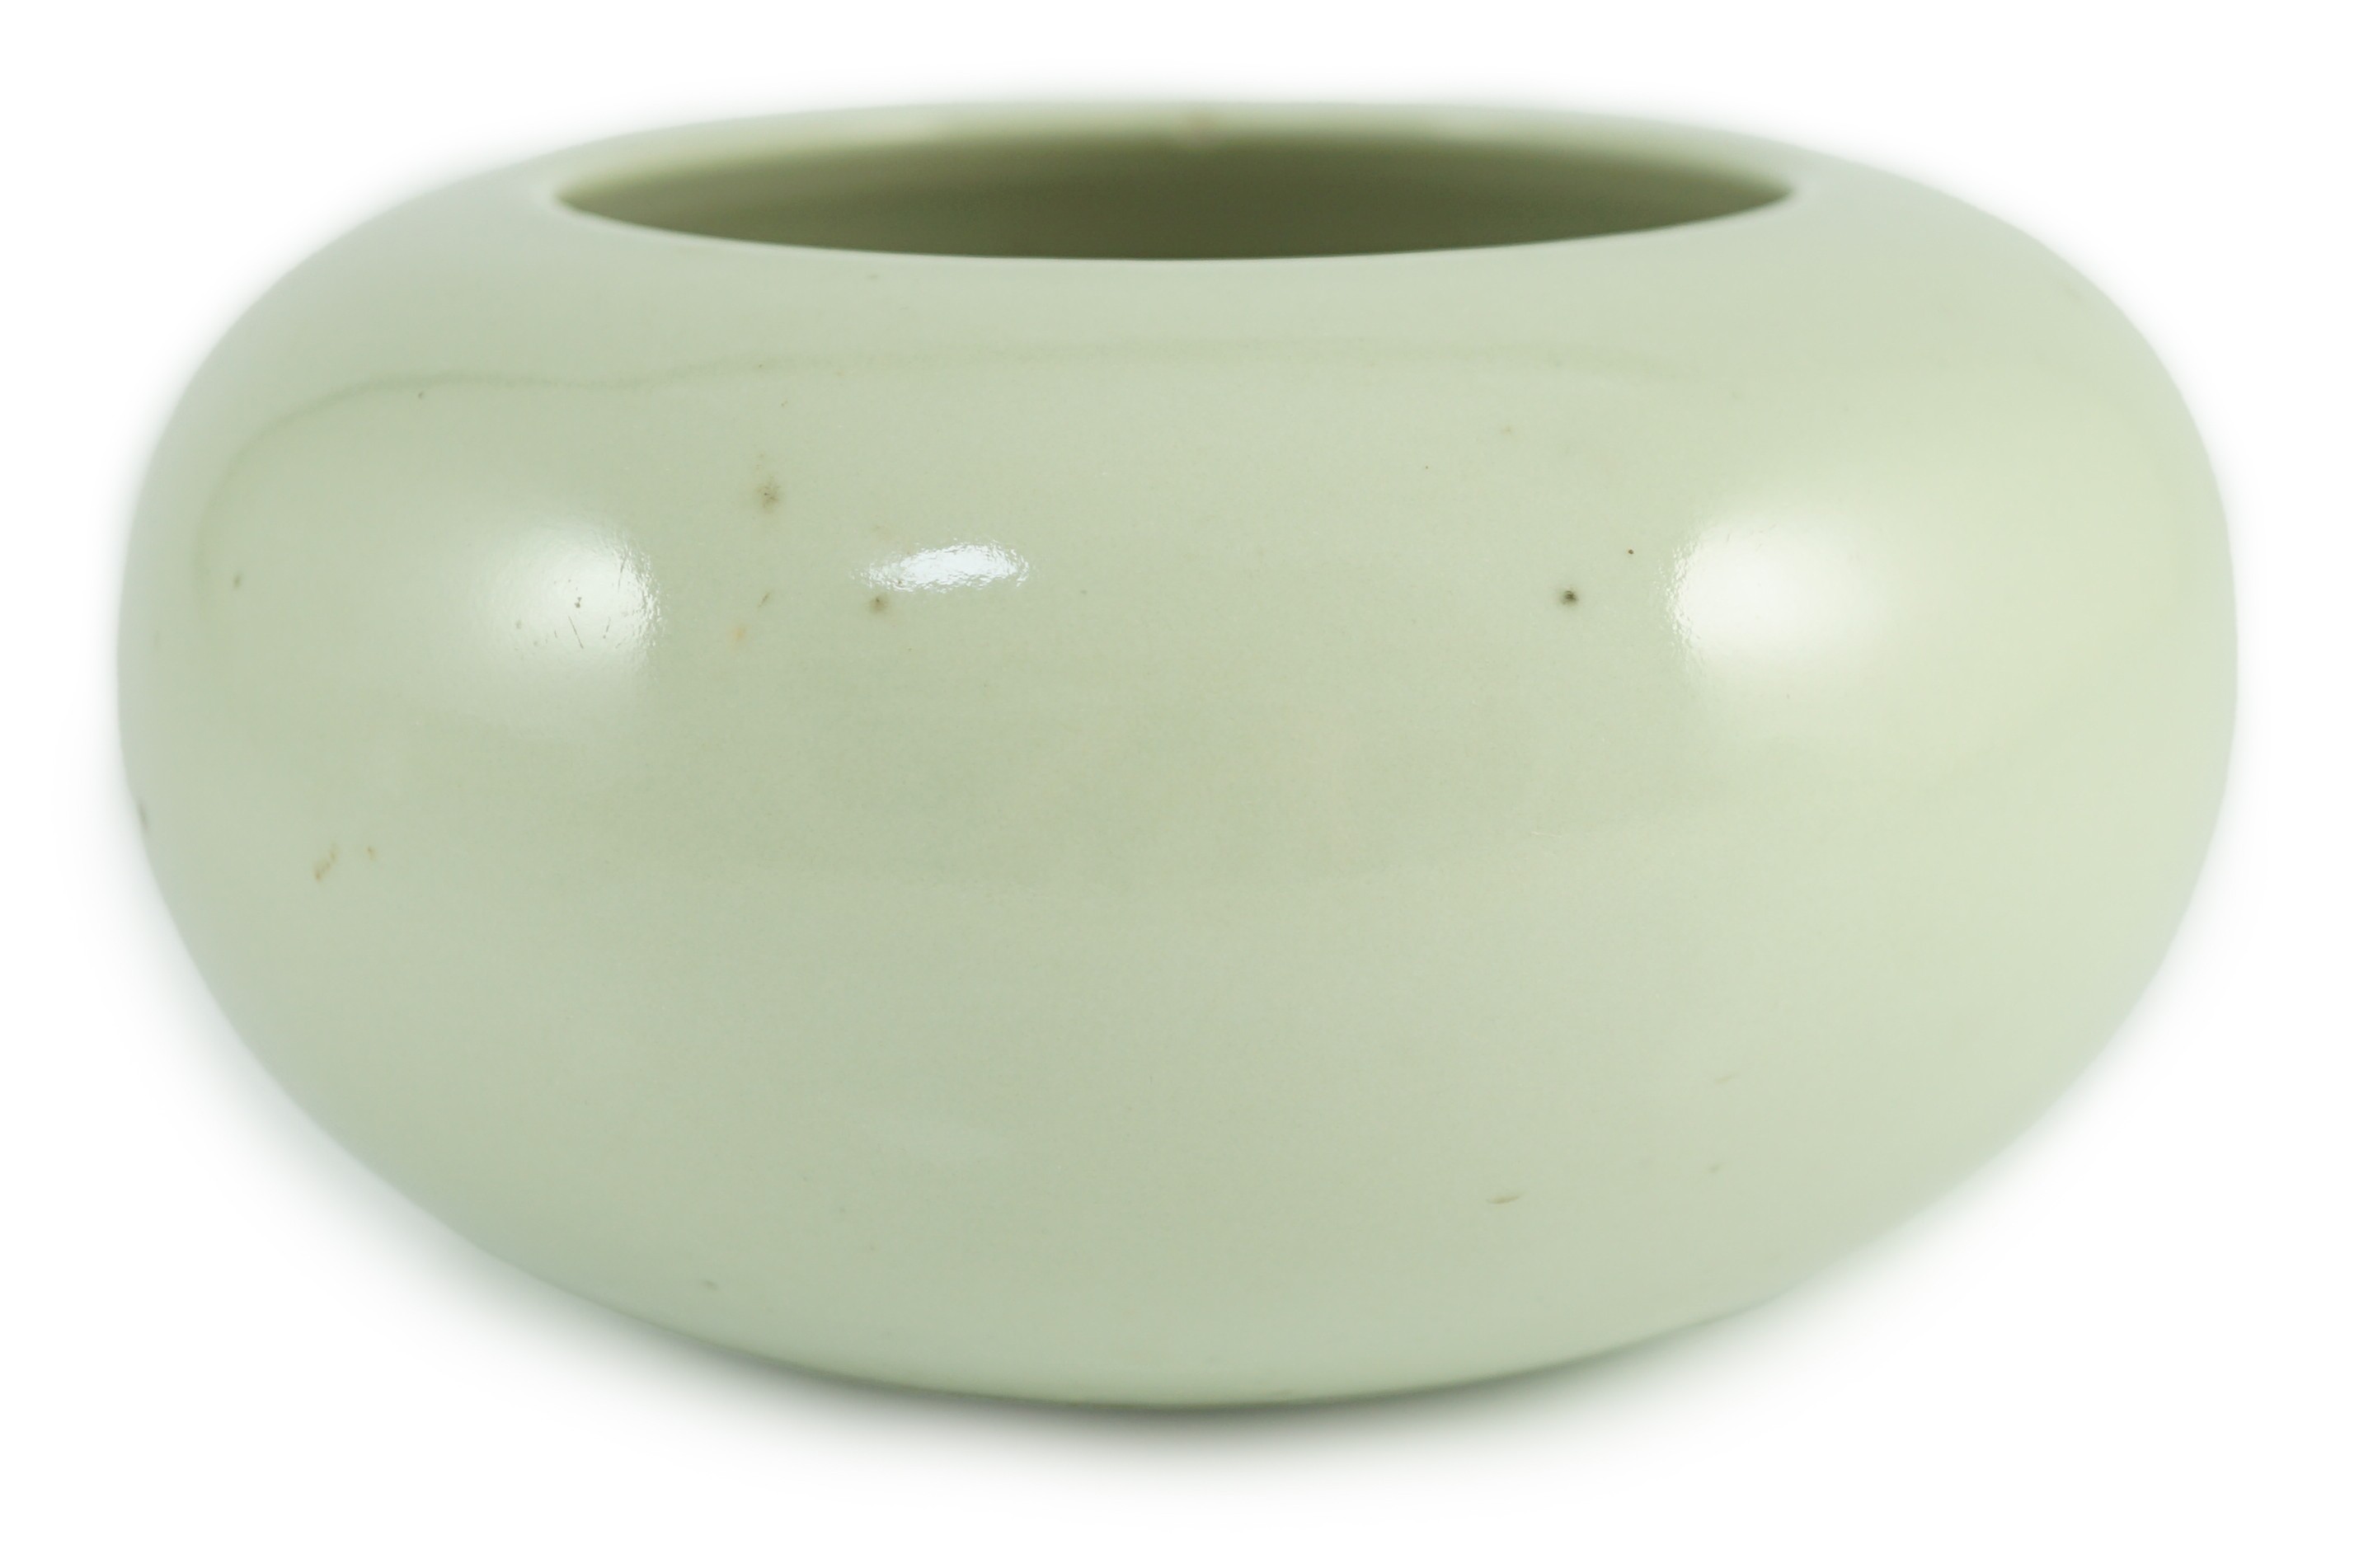 A Chinese celadon glazed water pot or alms bowl, late 19th century, with concave and unglazed